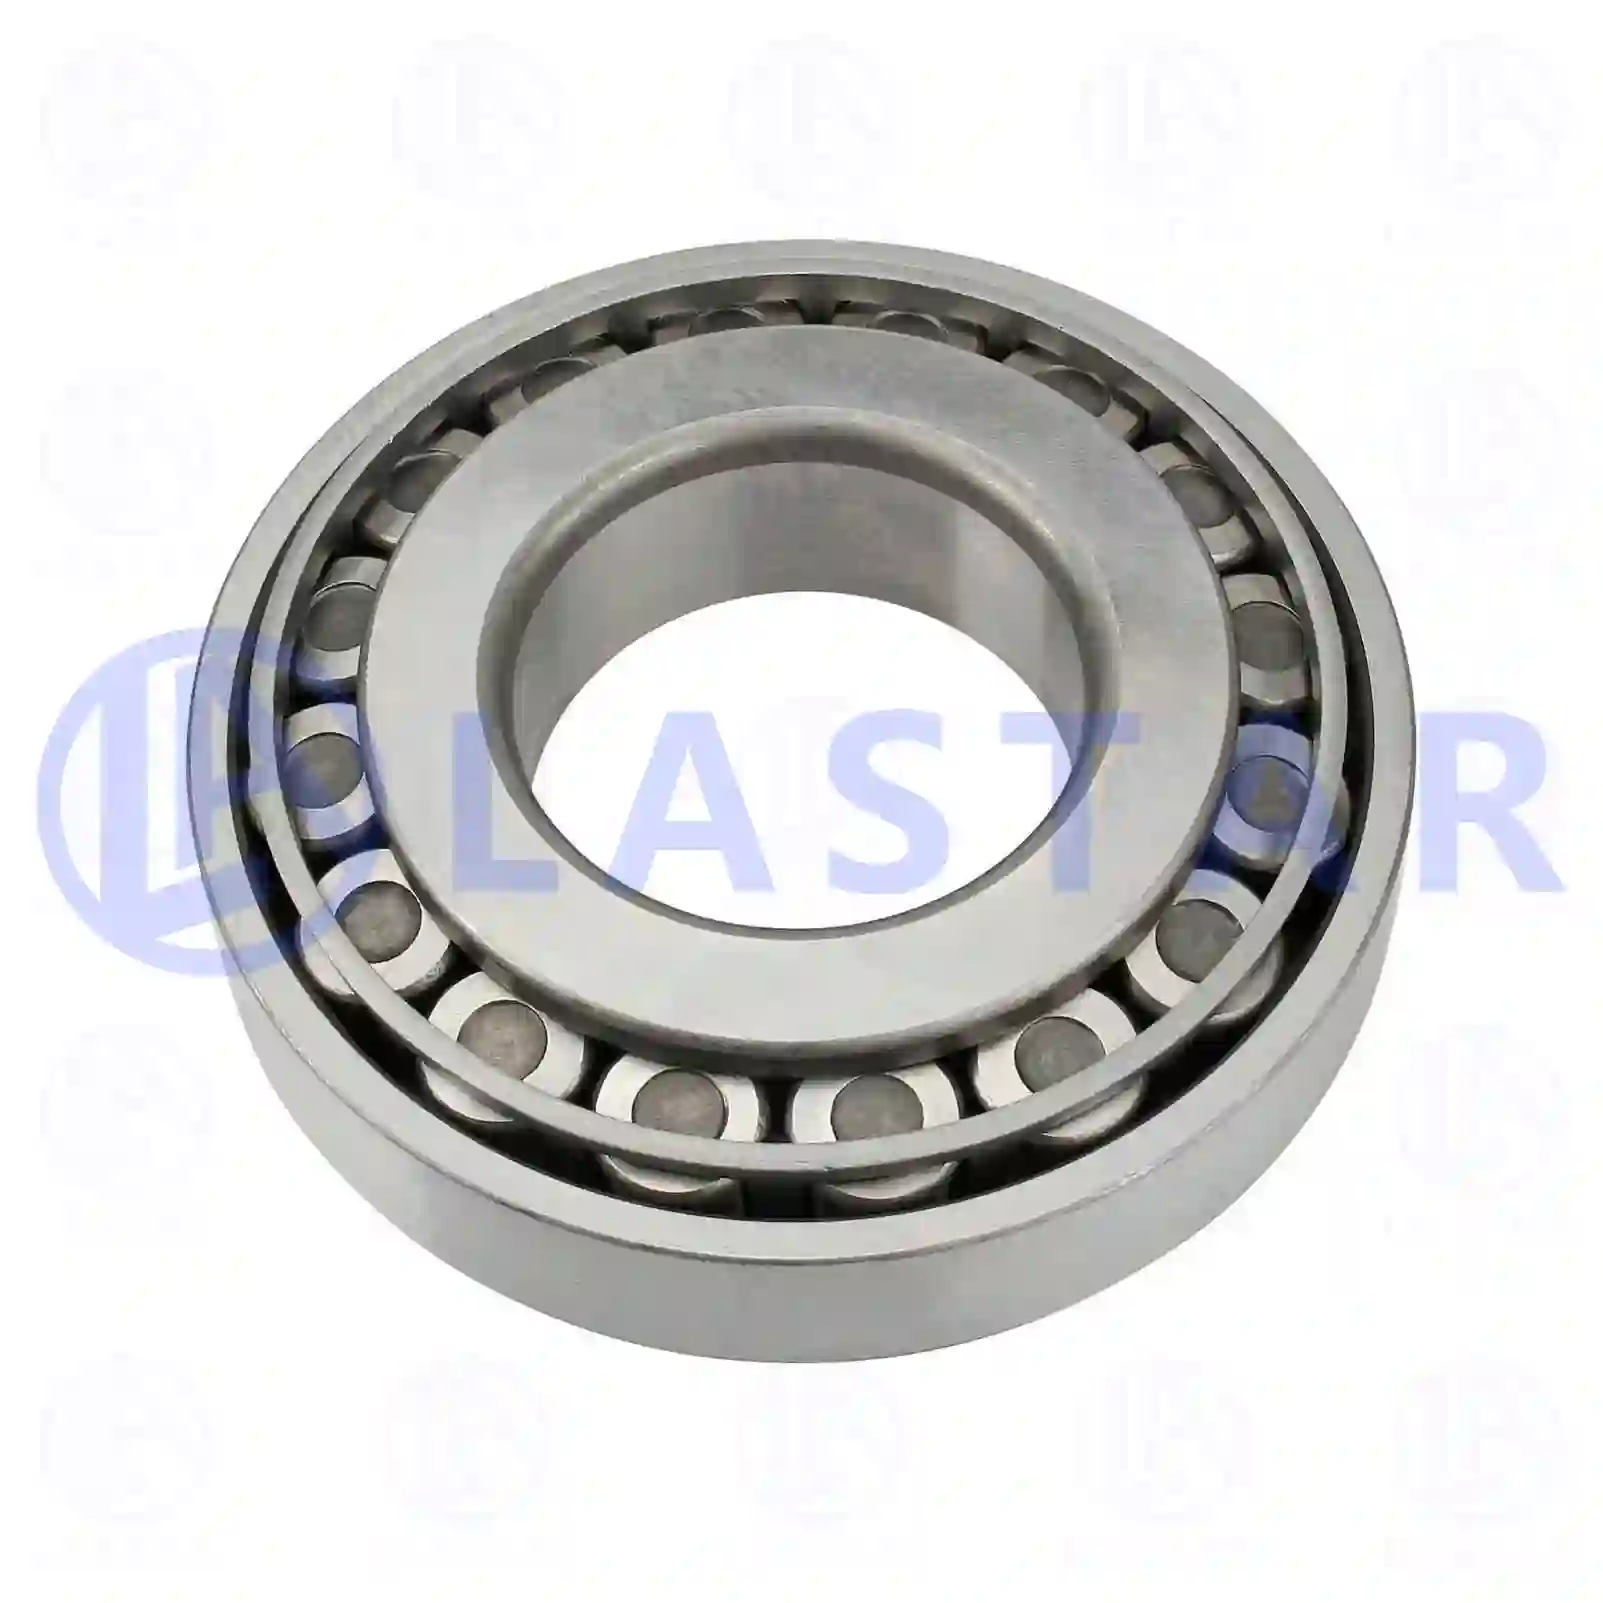 Bearings Tapered roller bearing, la no: 77725194 ,  oem no:0264026000, 01102859, 94031454, 1-09812013-0, 1-09812023-0, 1-09812070-0, 01102859, 01109985, 06324890113, 0009810505, 0009818905, 0019819705, 0019899705, 0029810205, 0029816005, 0039816205, 0069816505, 0089818805, 0109810005, 0109812805, 0109812905, 0109815505, 0129818805, 0129819205, 0129819405, 0139818405, 0169811205, 3449817005, MH043008, 38326-90002, 40208-90009, 4200001500, 1357711, 366305, ZG02968-0008 Lastar Spare Part | Truck Spare Parts, Auotomotive Spare Parts